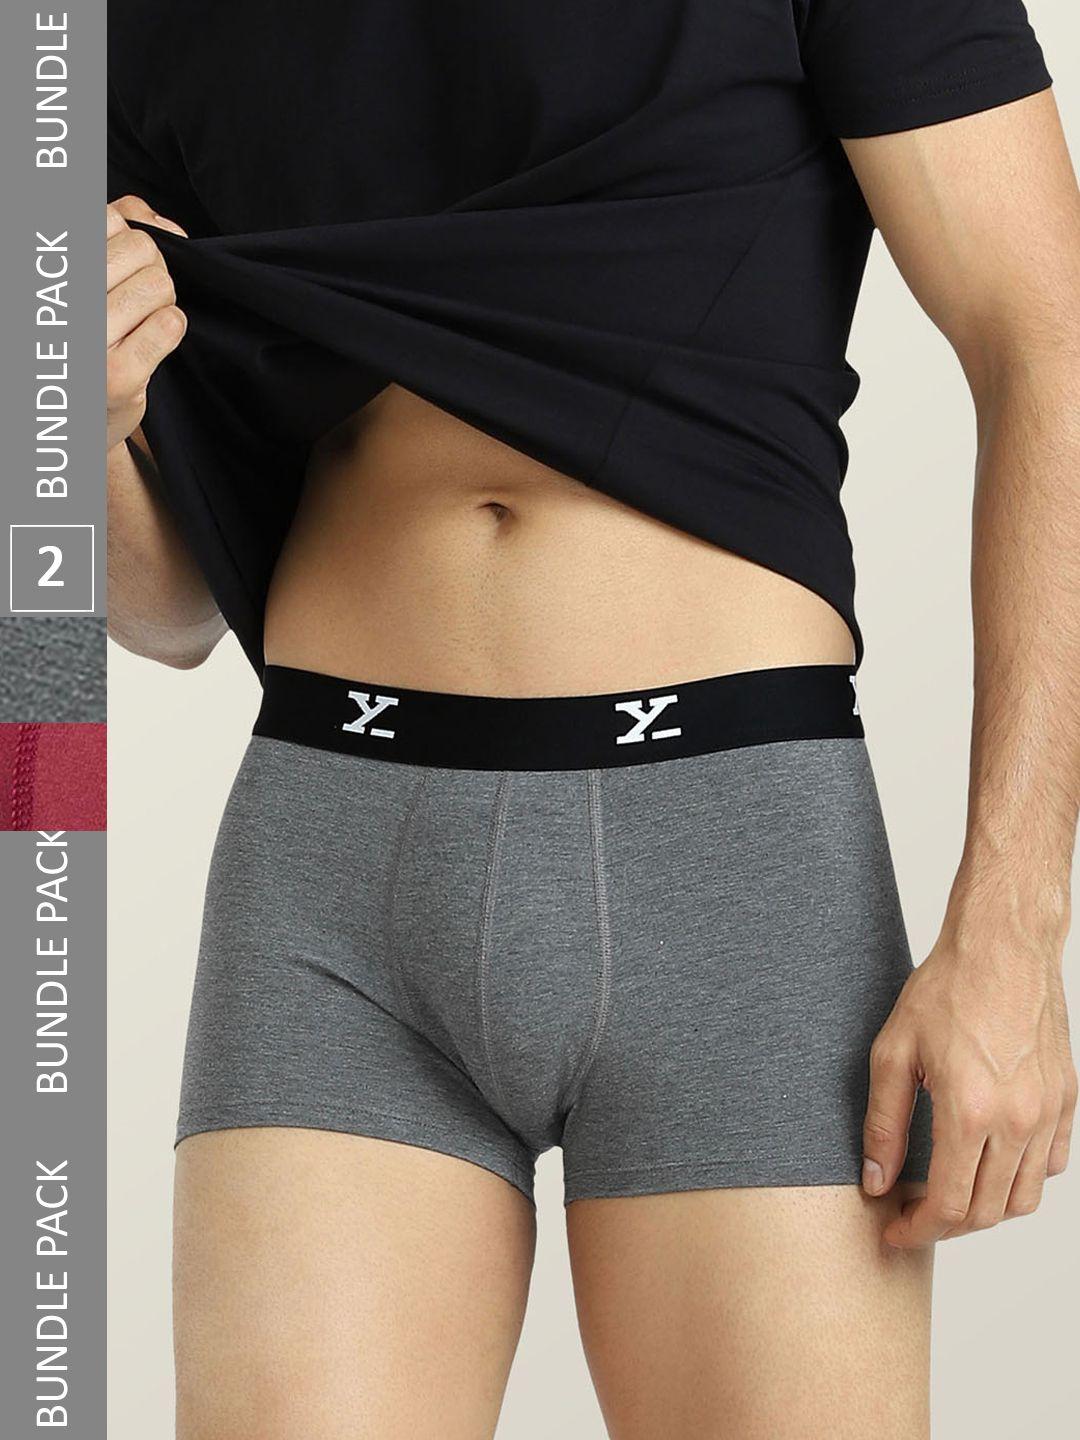 xyxx-pack-of-2-trunks-xytrnk2pckn567